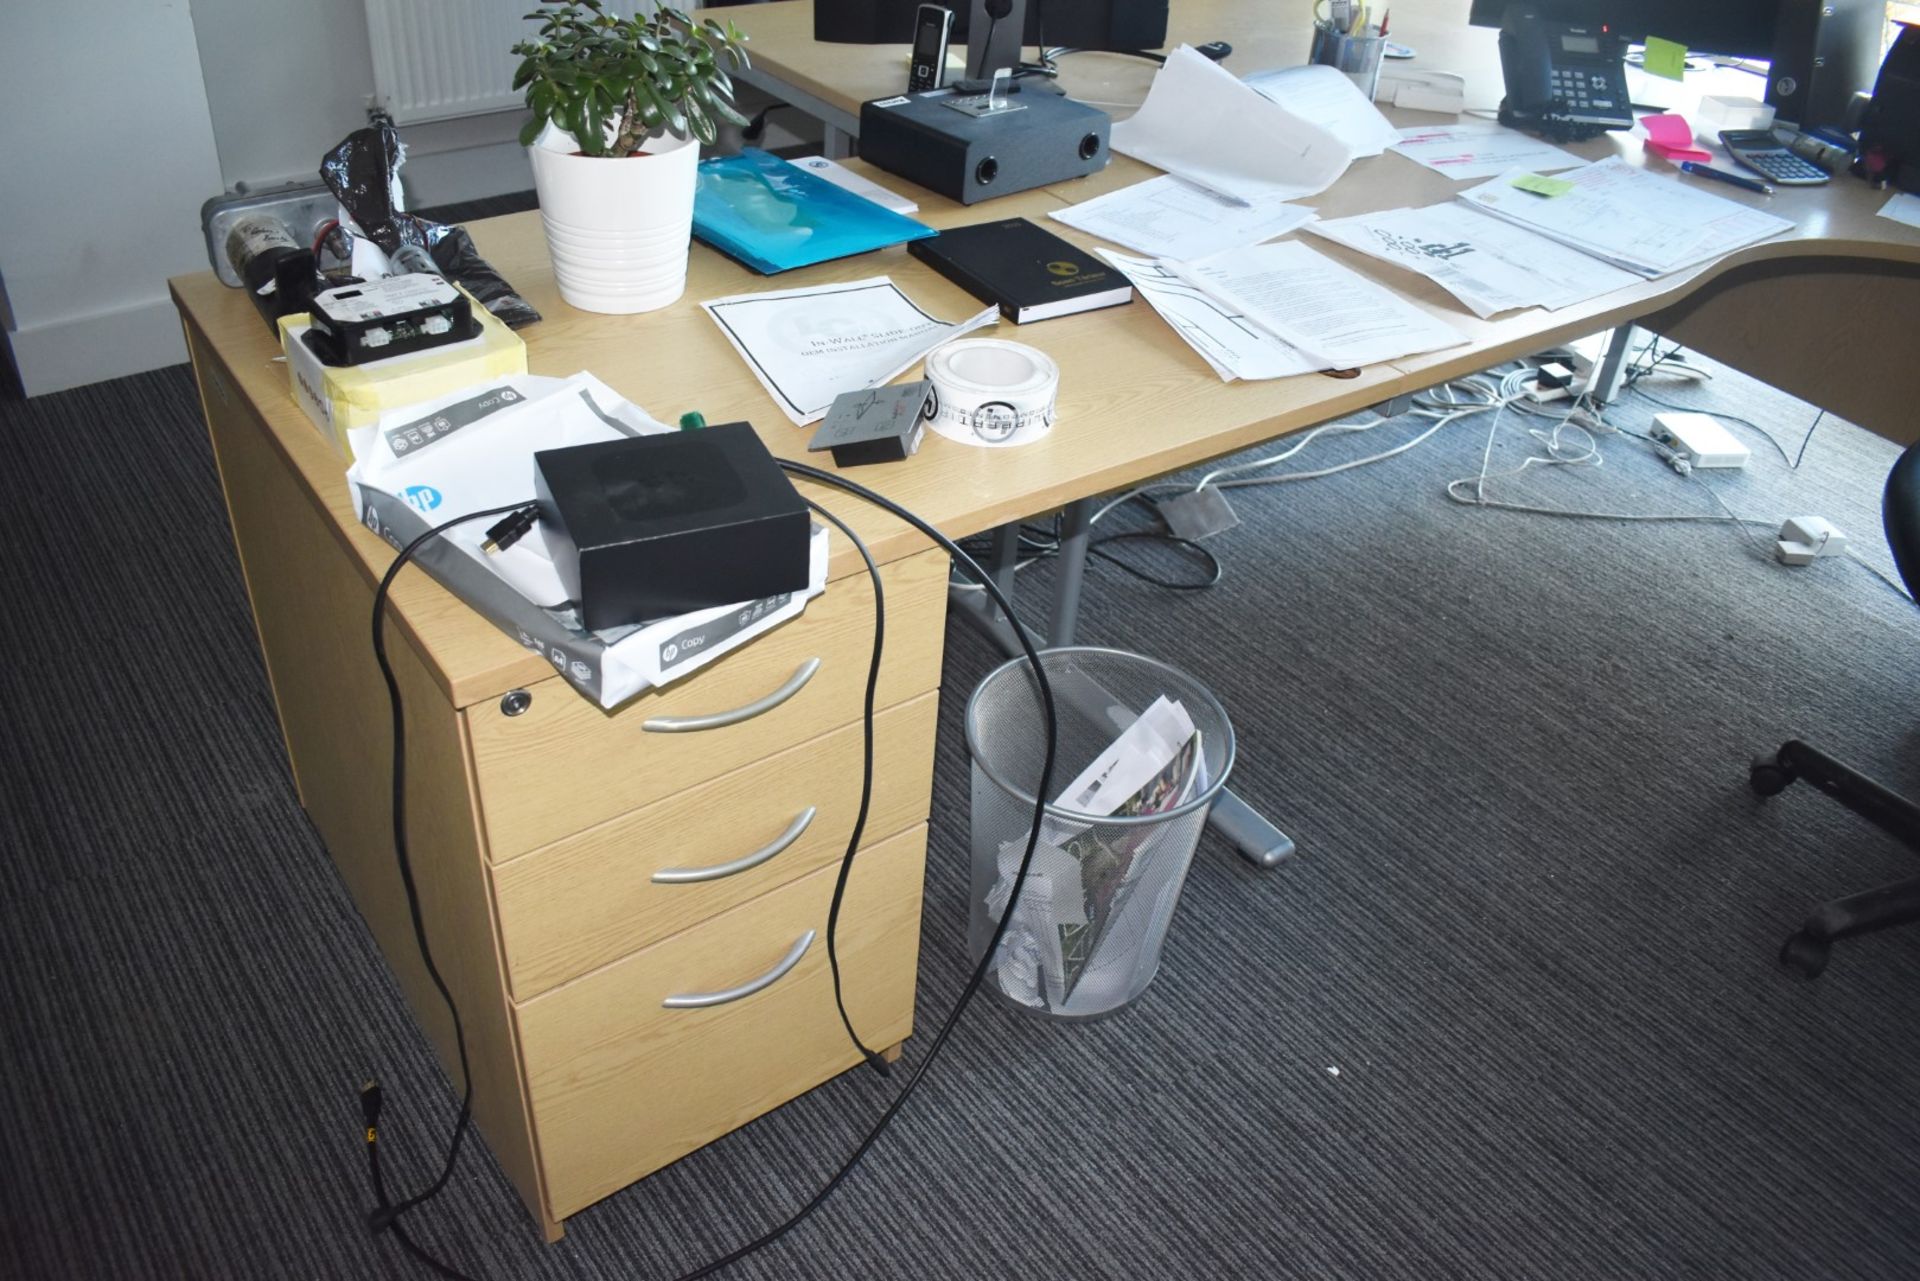 1 x Collection of Office Furniture - Includes 2 x Office Desks, 2 x Executive Leather Swivel Chairs, - Image 6 of 7